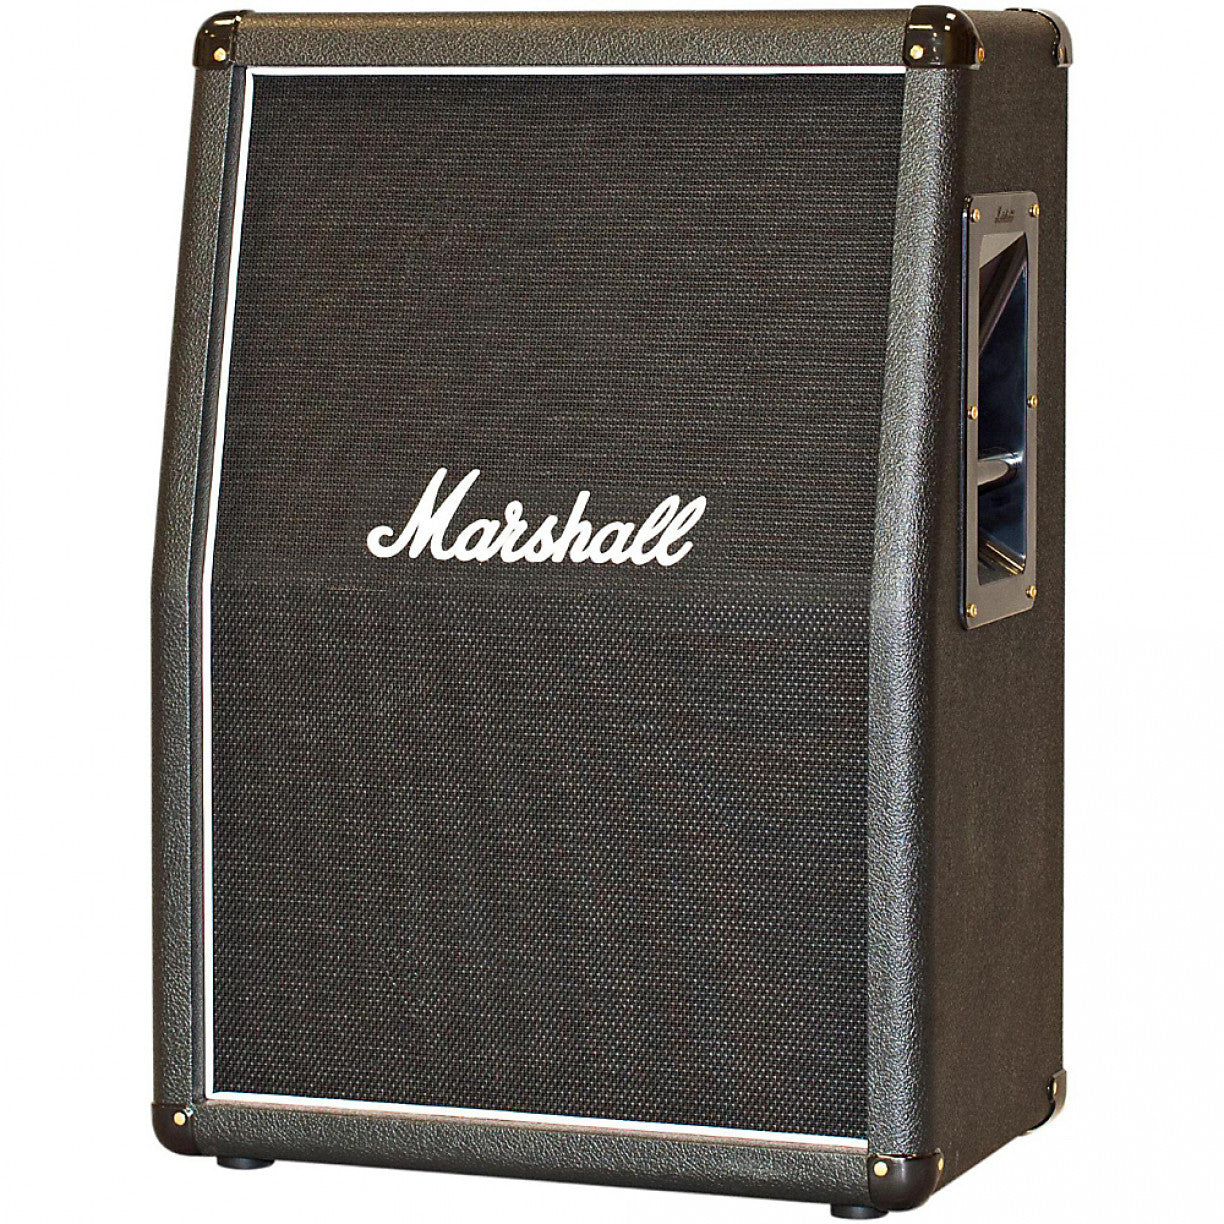 MARSHALL MX212A VERTICAL 2 X 12 SPEAKER CABINET